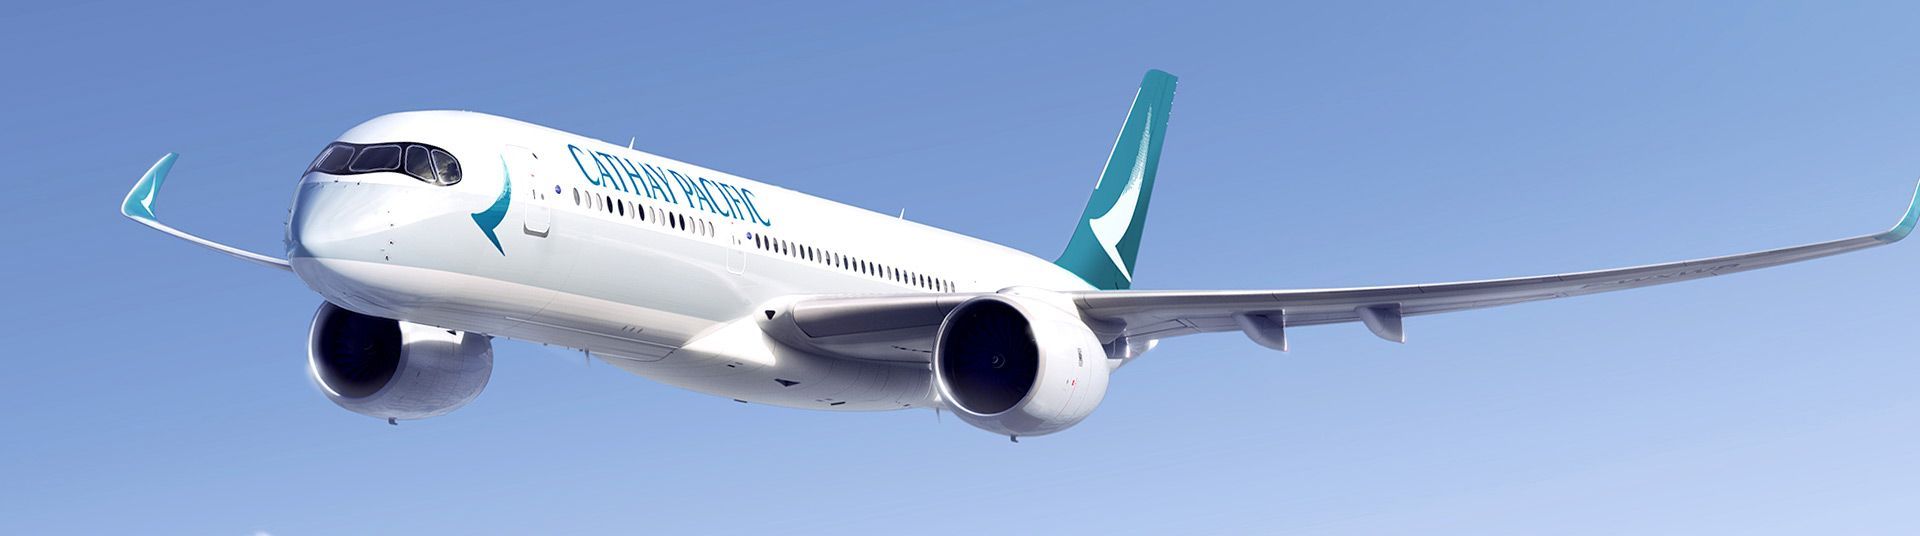 cathay pacific service client